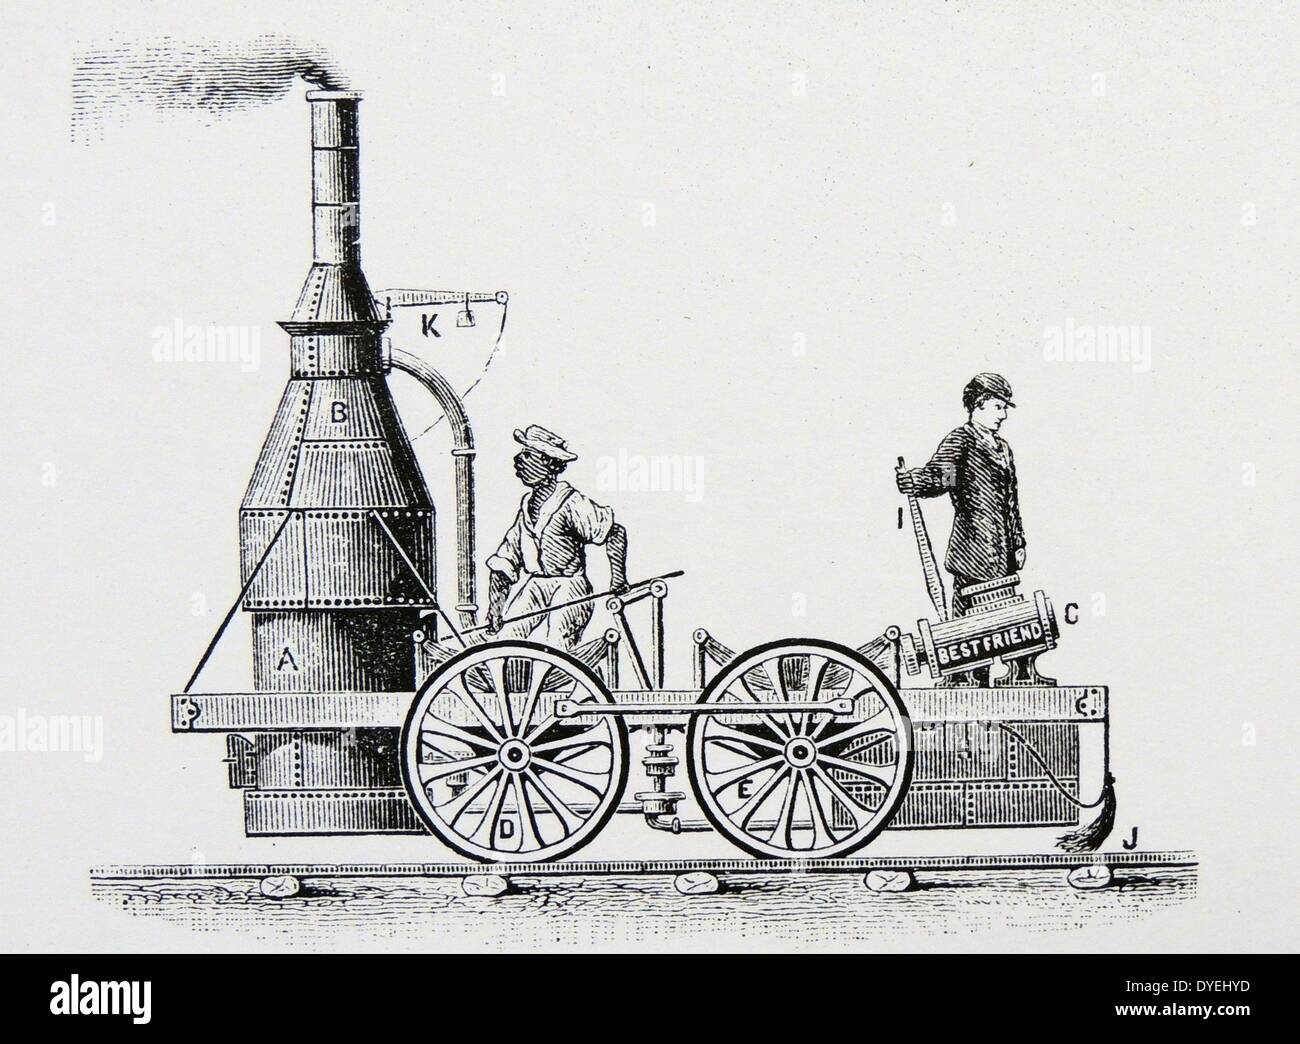 Best Friend of Charleston', locomotive built at the West Point Foundry from the Charleston & Hamburg Railroad, USA. Pulled the first train out of Charleston on Christmas Day 1830. Worked until its boiler exploded in 1831. Engraving, c1880. Stock Photo